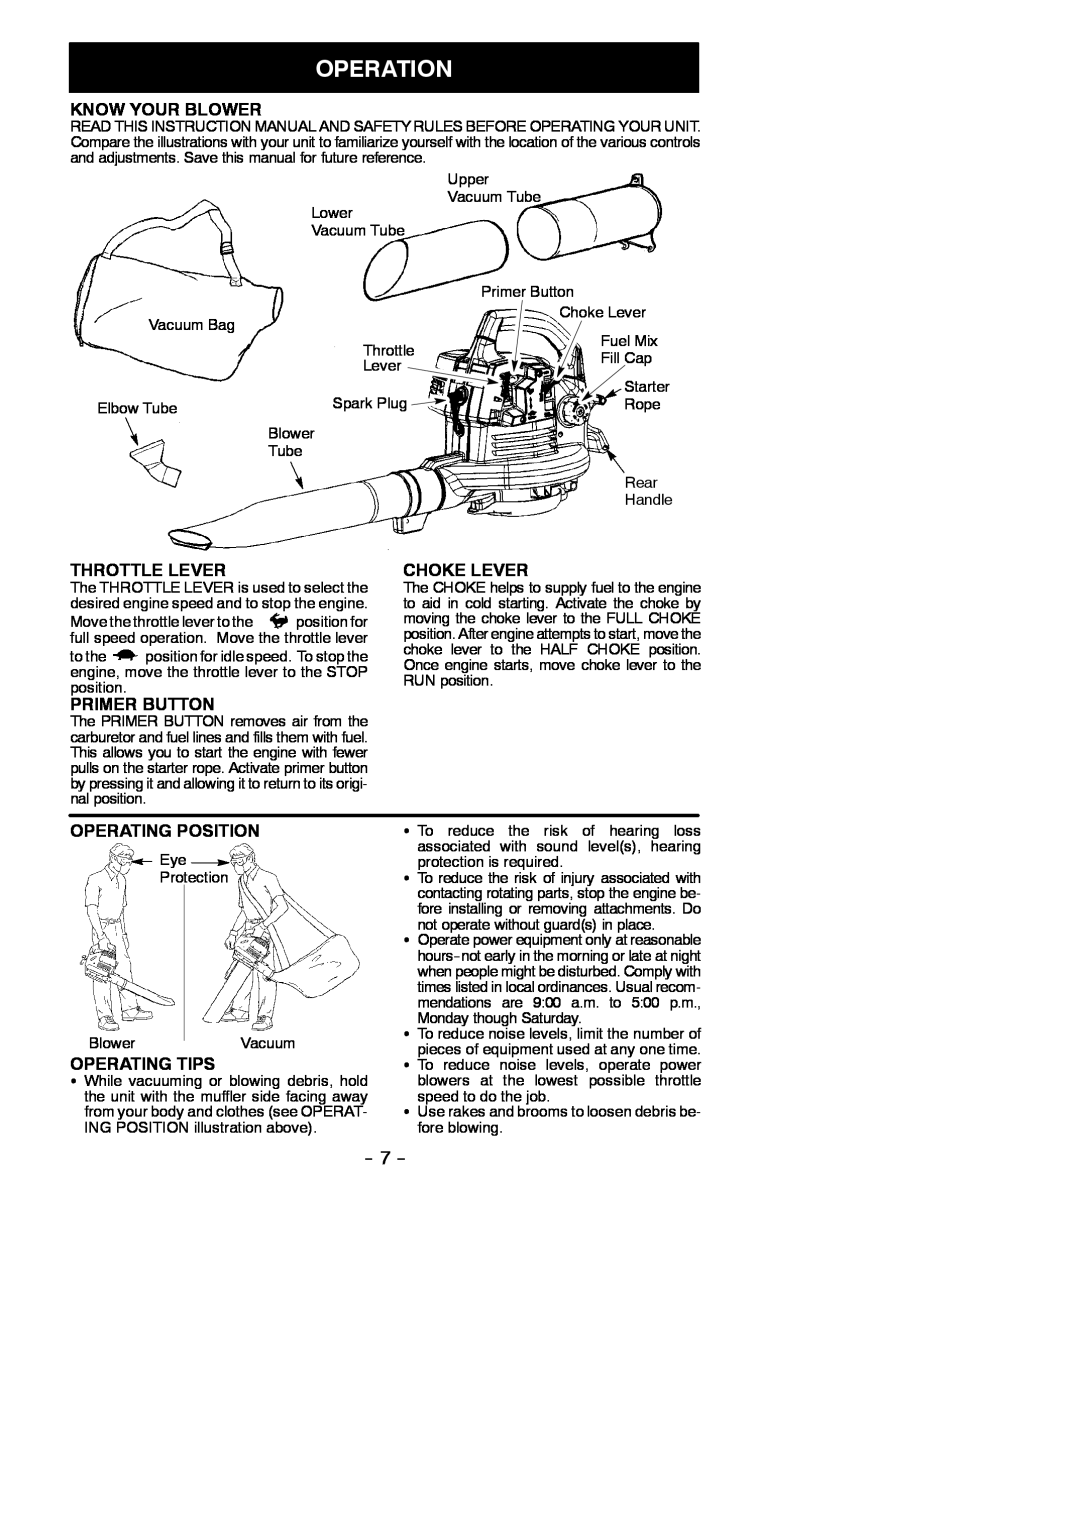 Poulan WT200 LE Operation, Know Your Blower, Throttle Lever, Choke Lever, Primer Button, Operating Position 